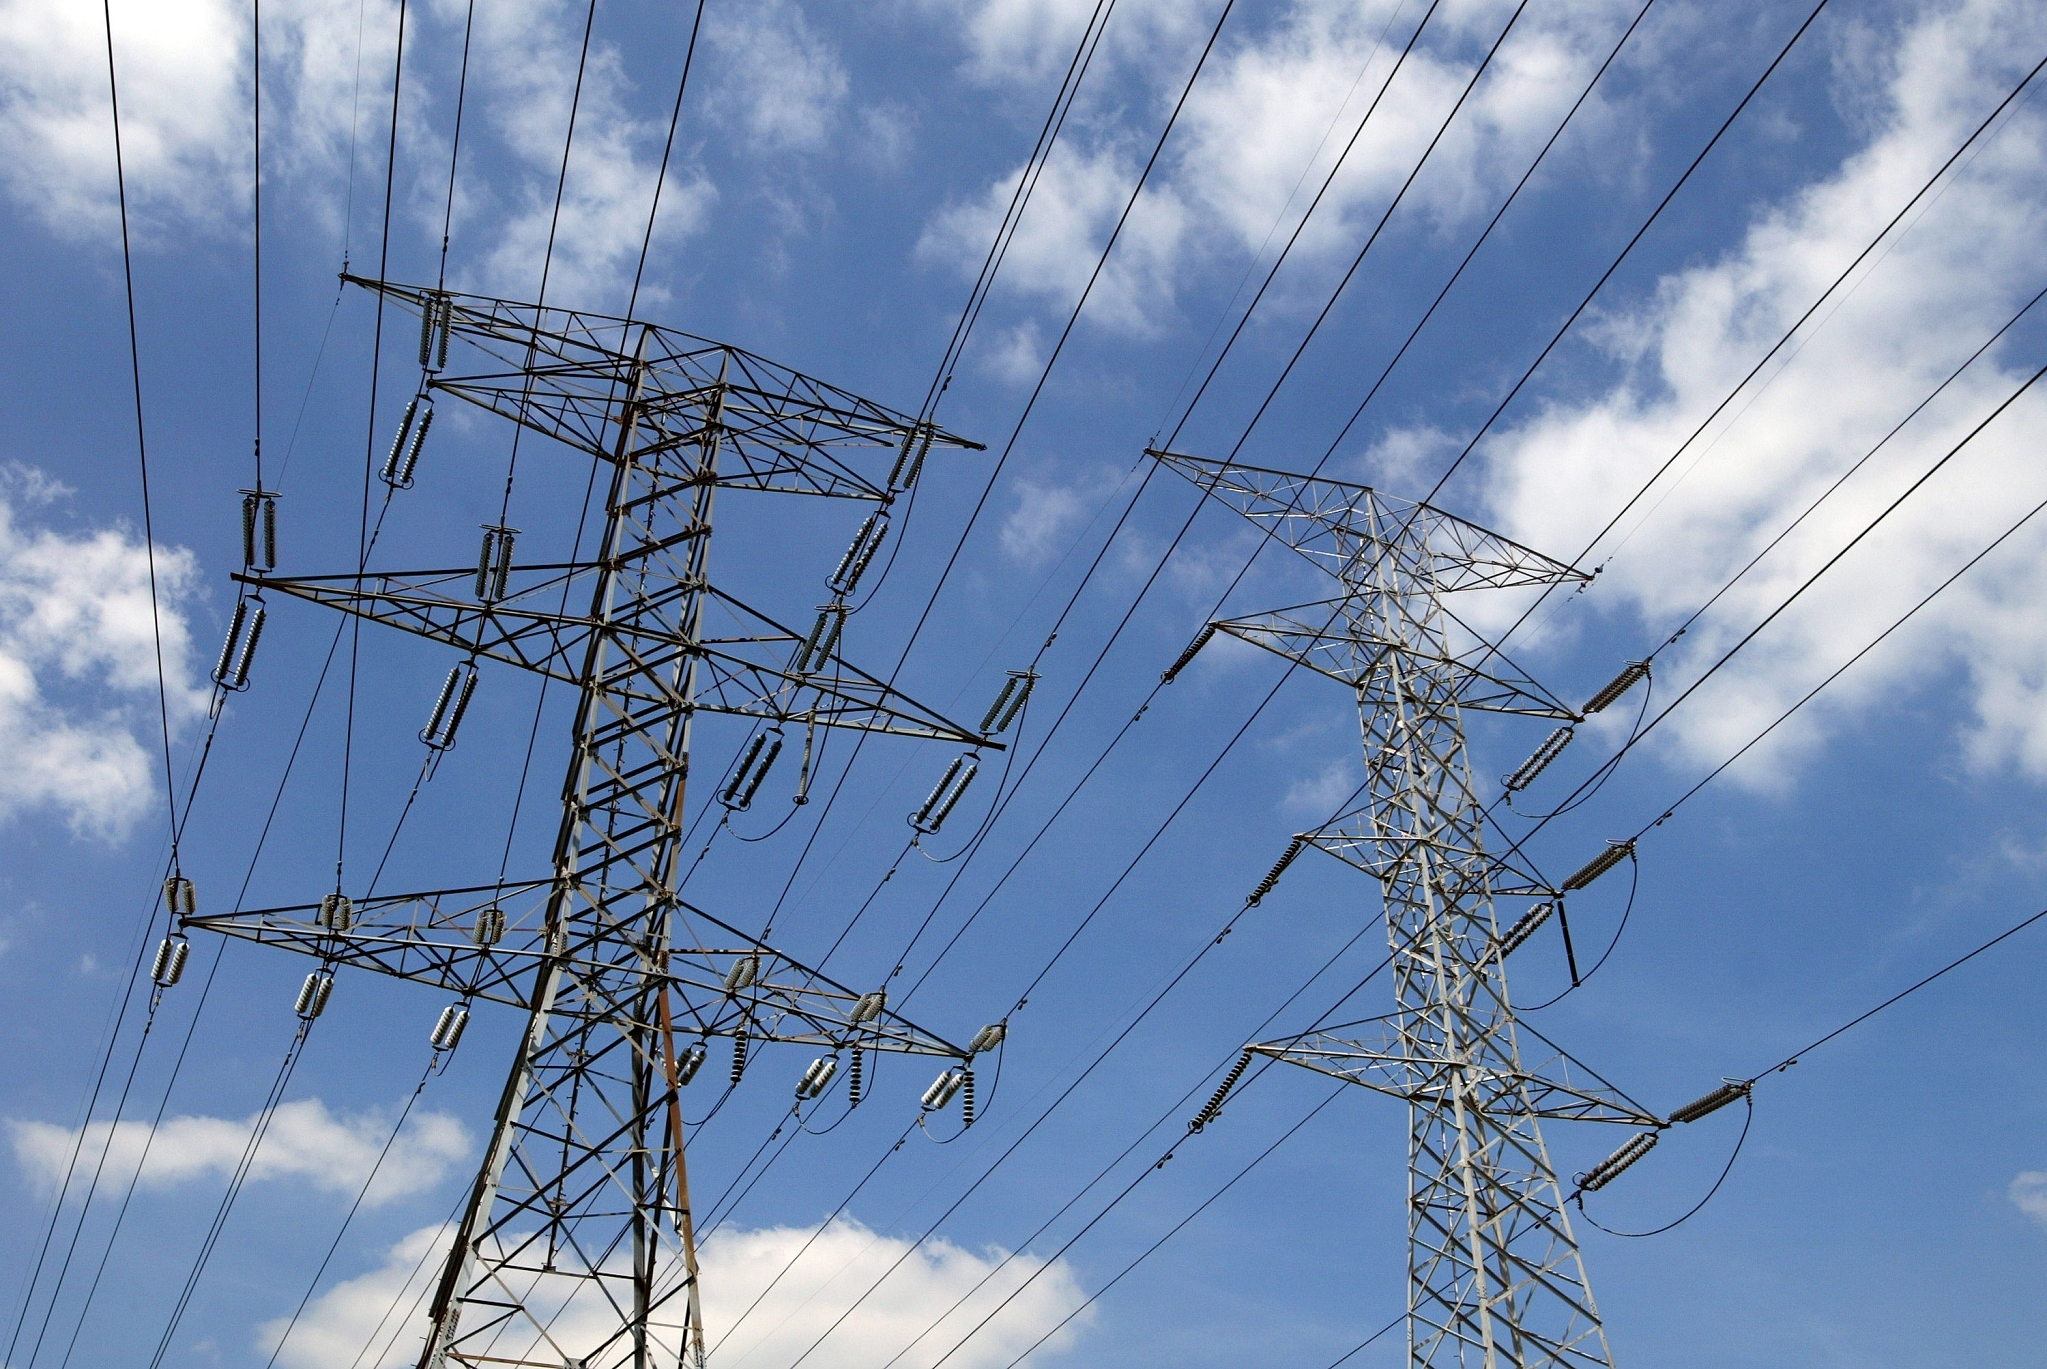 The Uttar Pradesh power sector is set for new investments. (Tim Boyle via Getty Images)